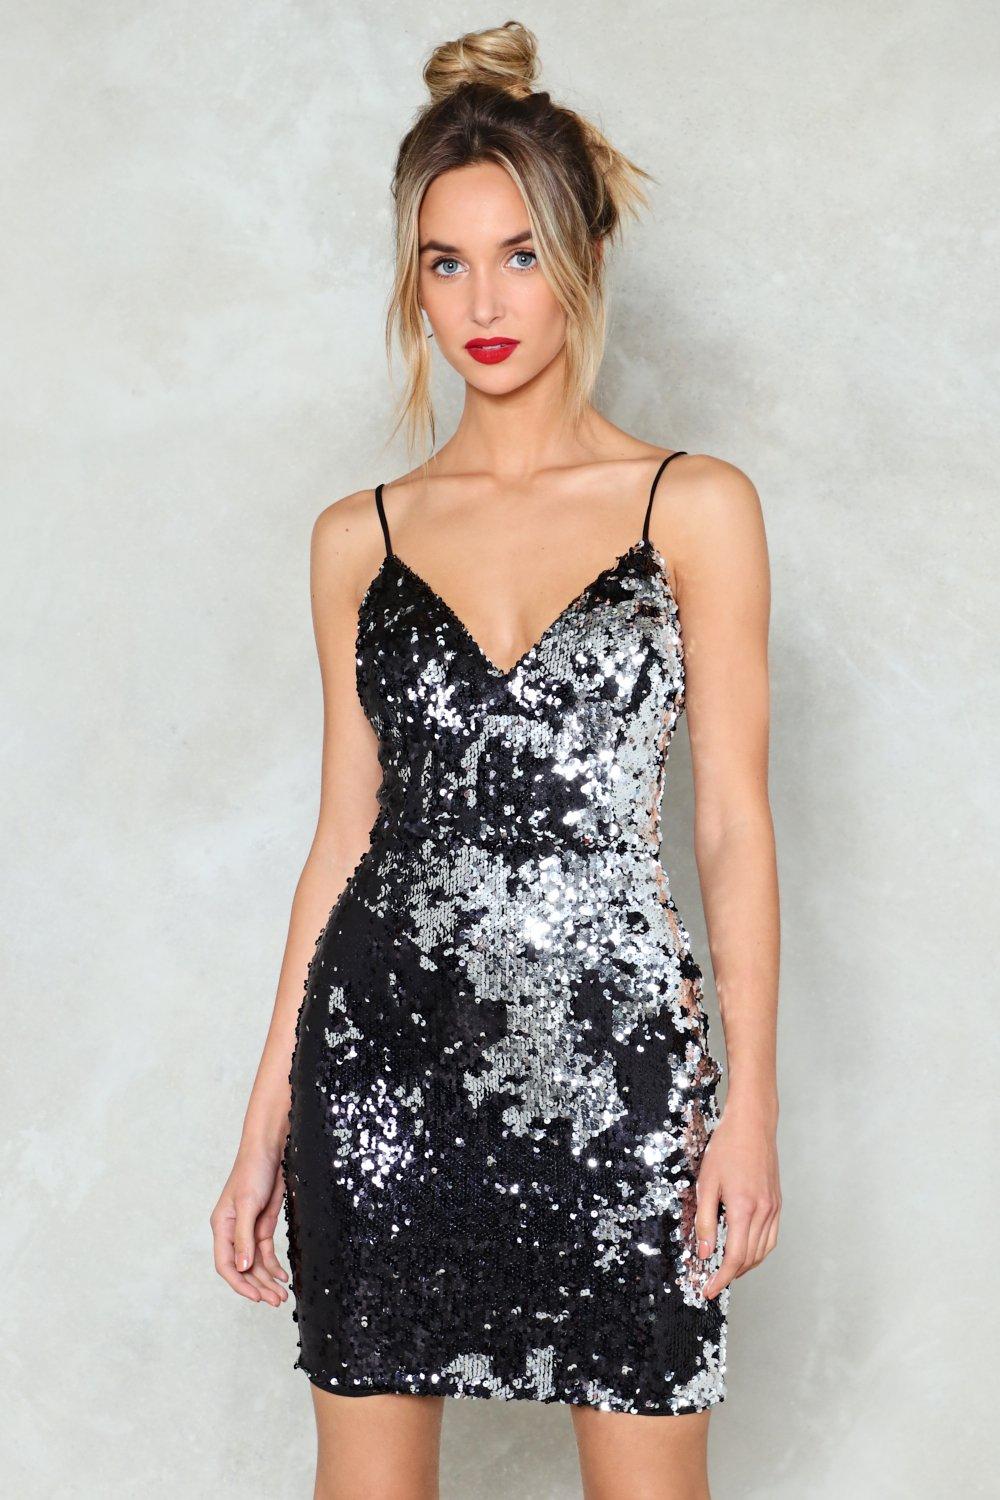 where can i buy a sequin dress